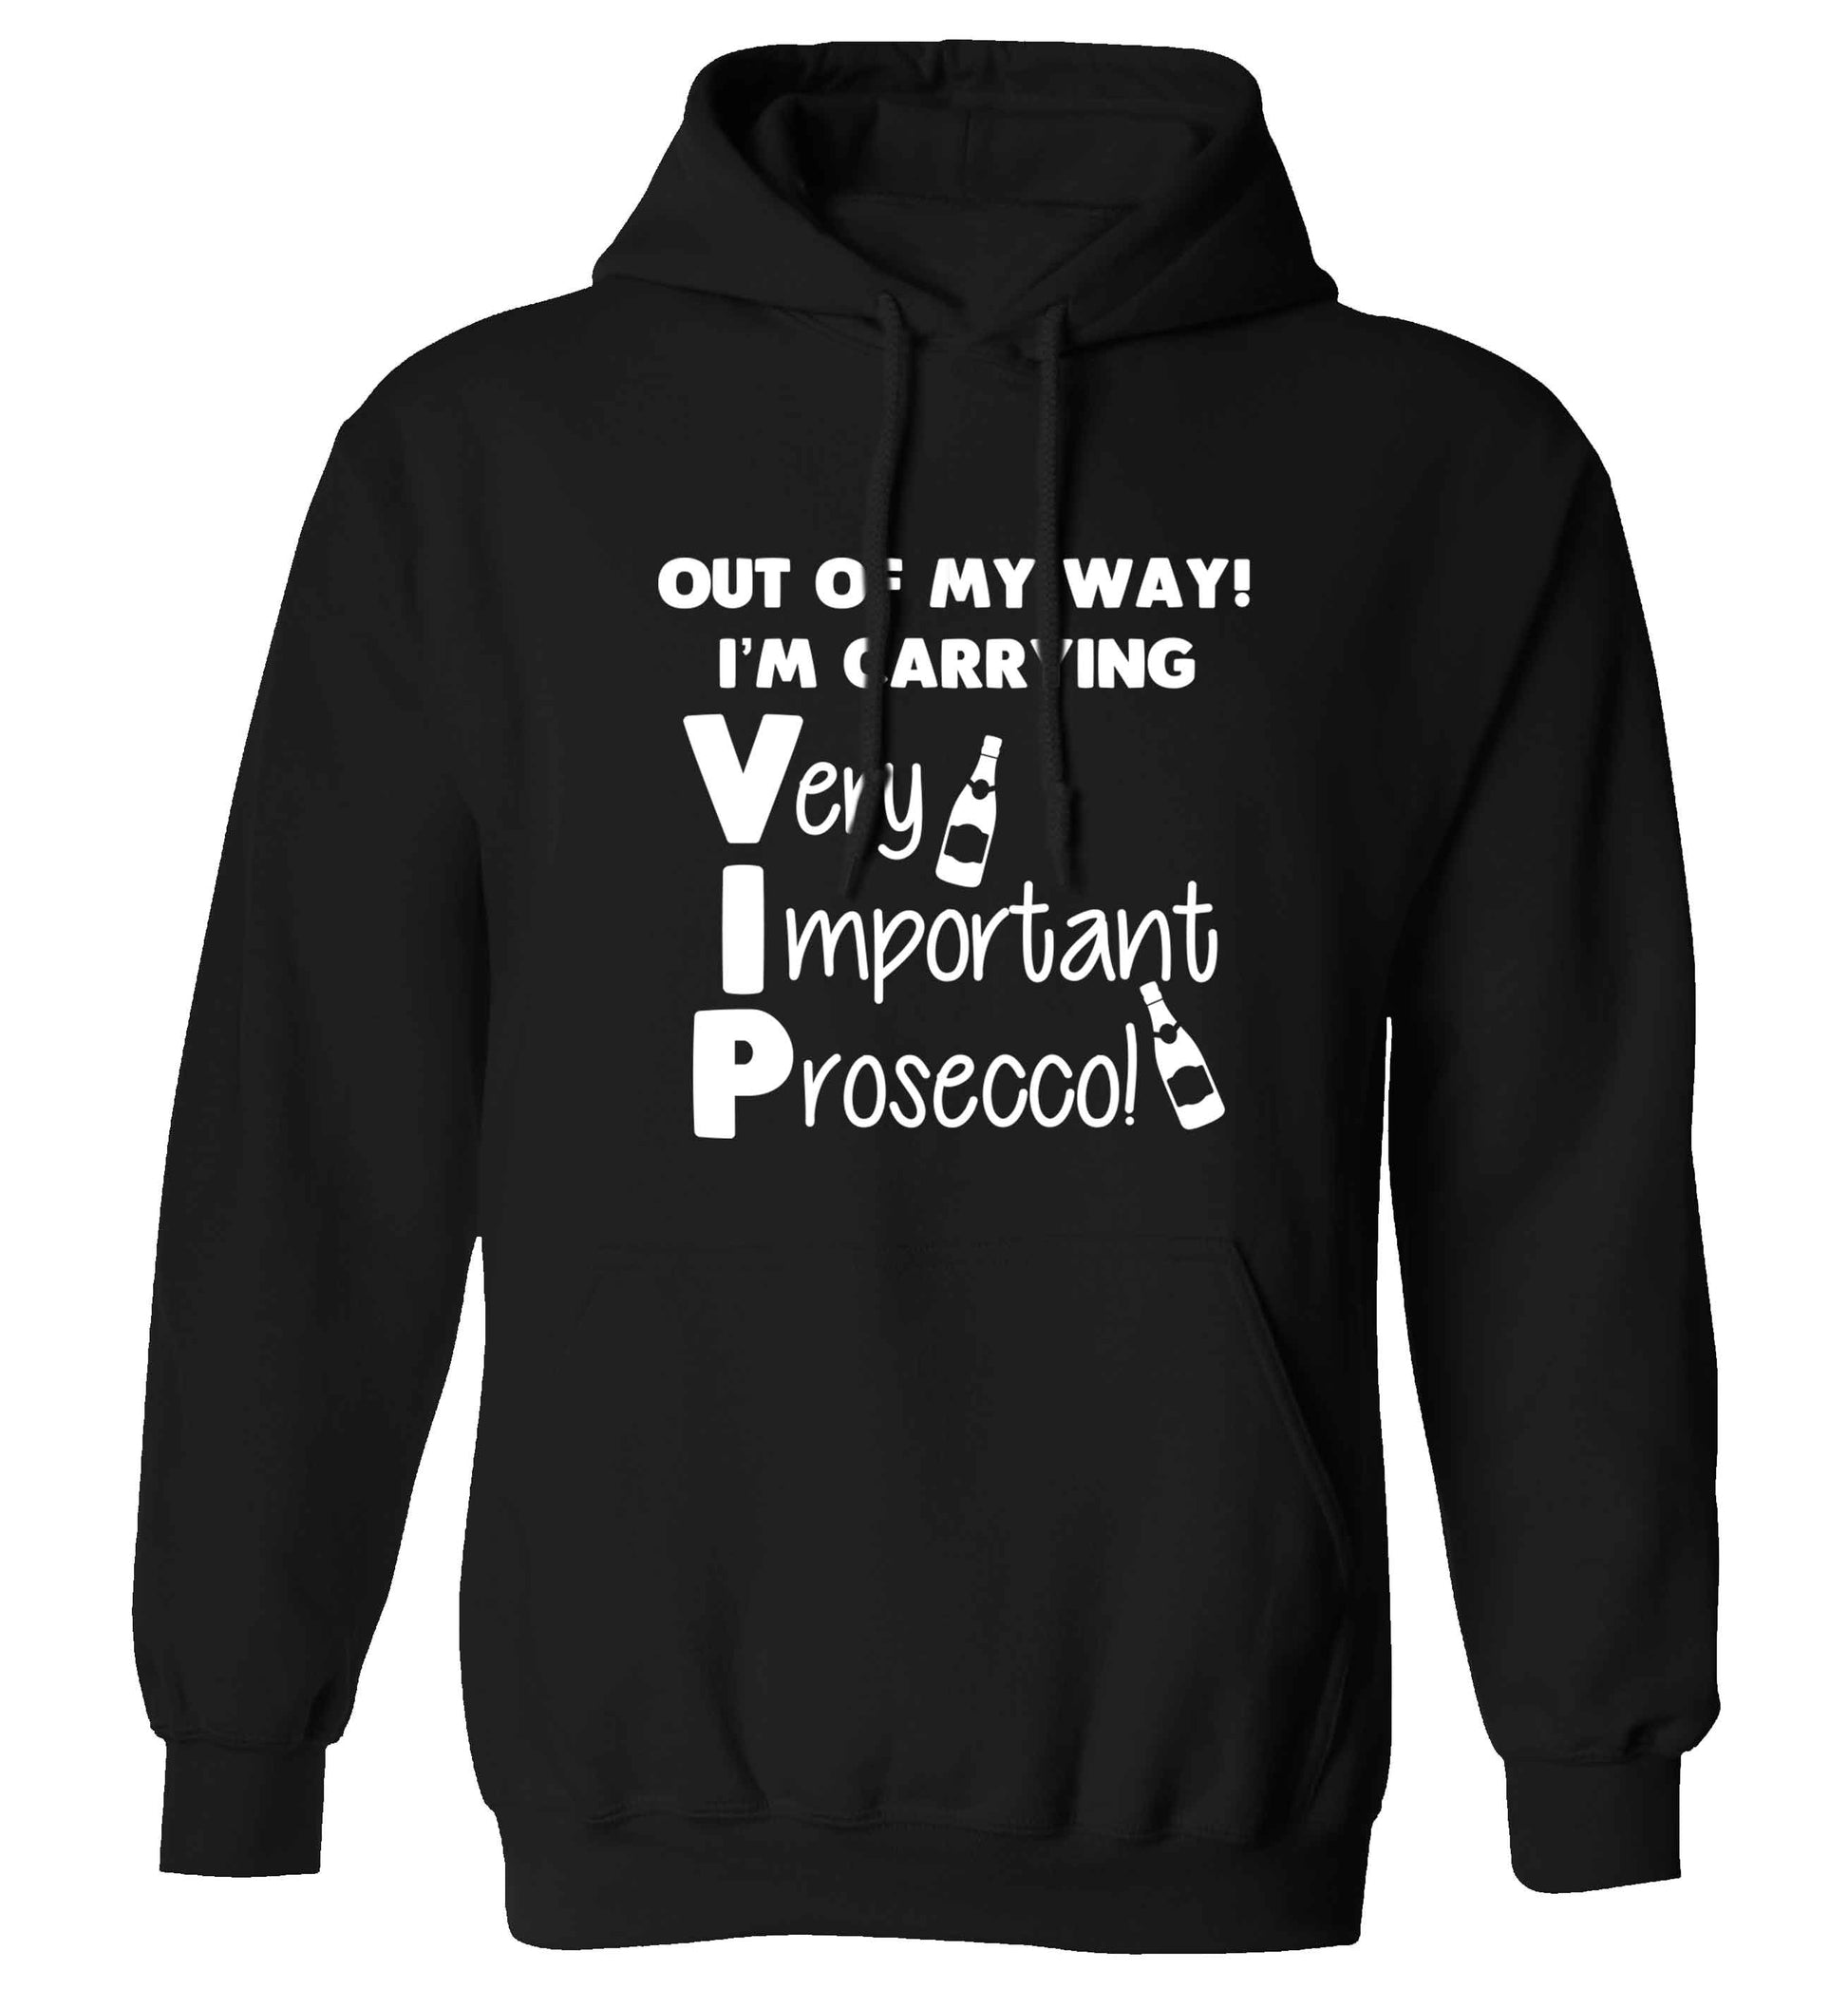 Out of my way I'm carrying very important prosecco! adults unisex black hoodie 2XL